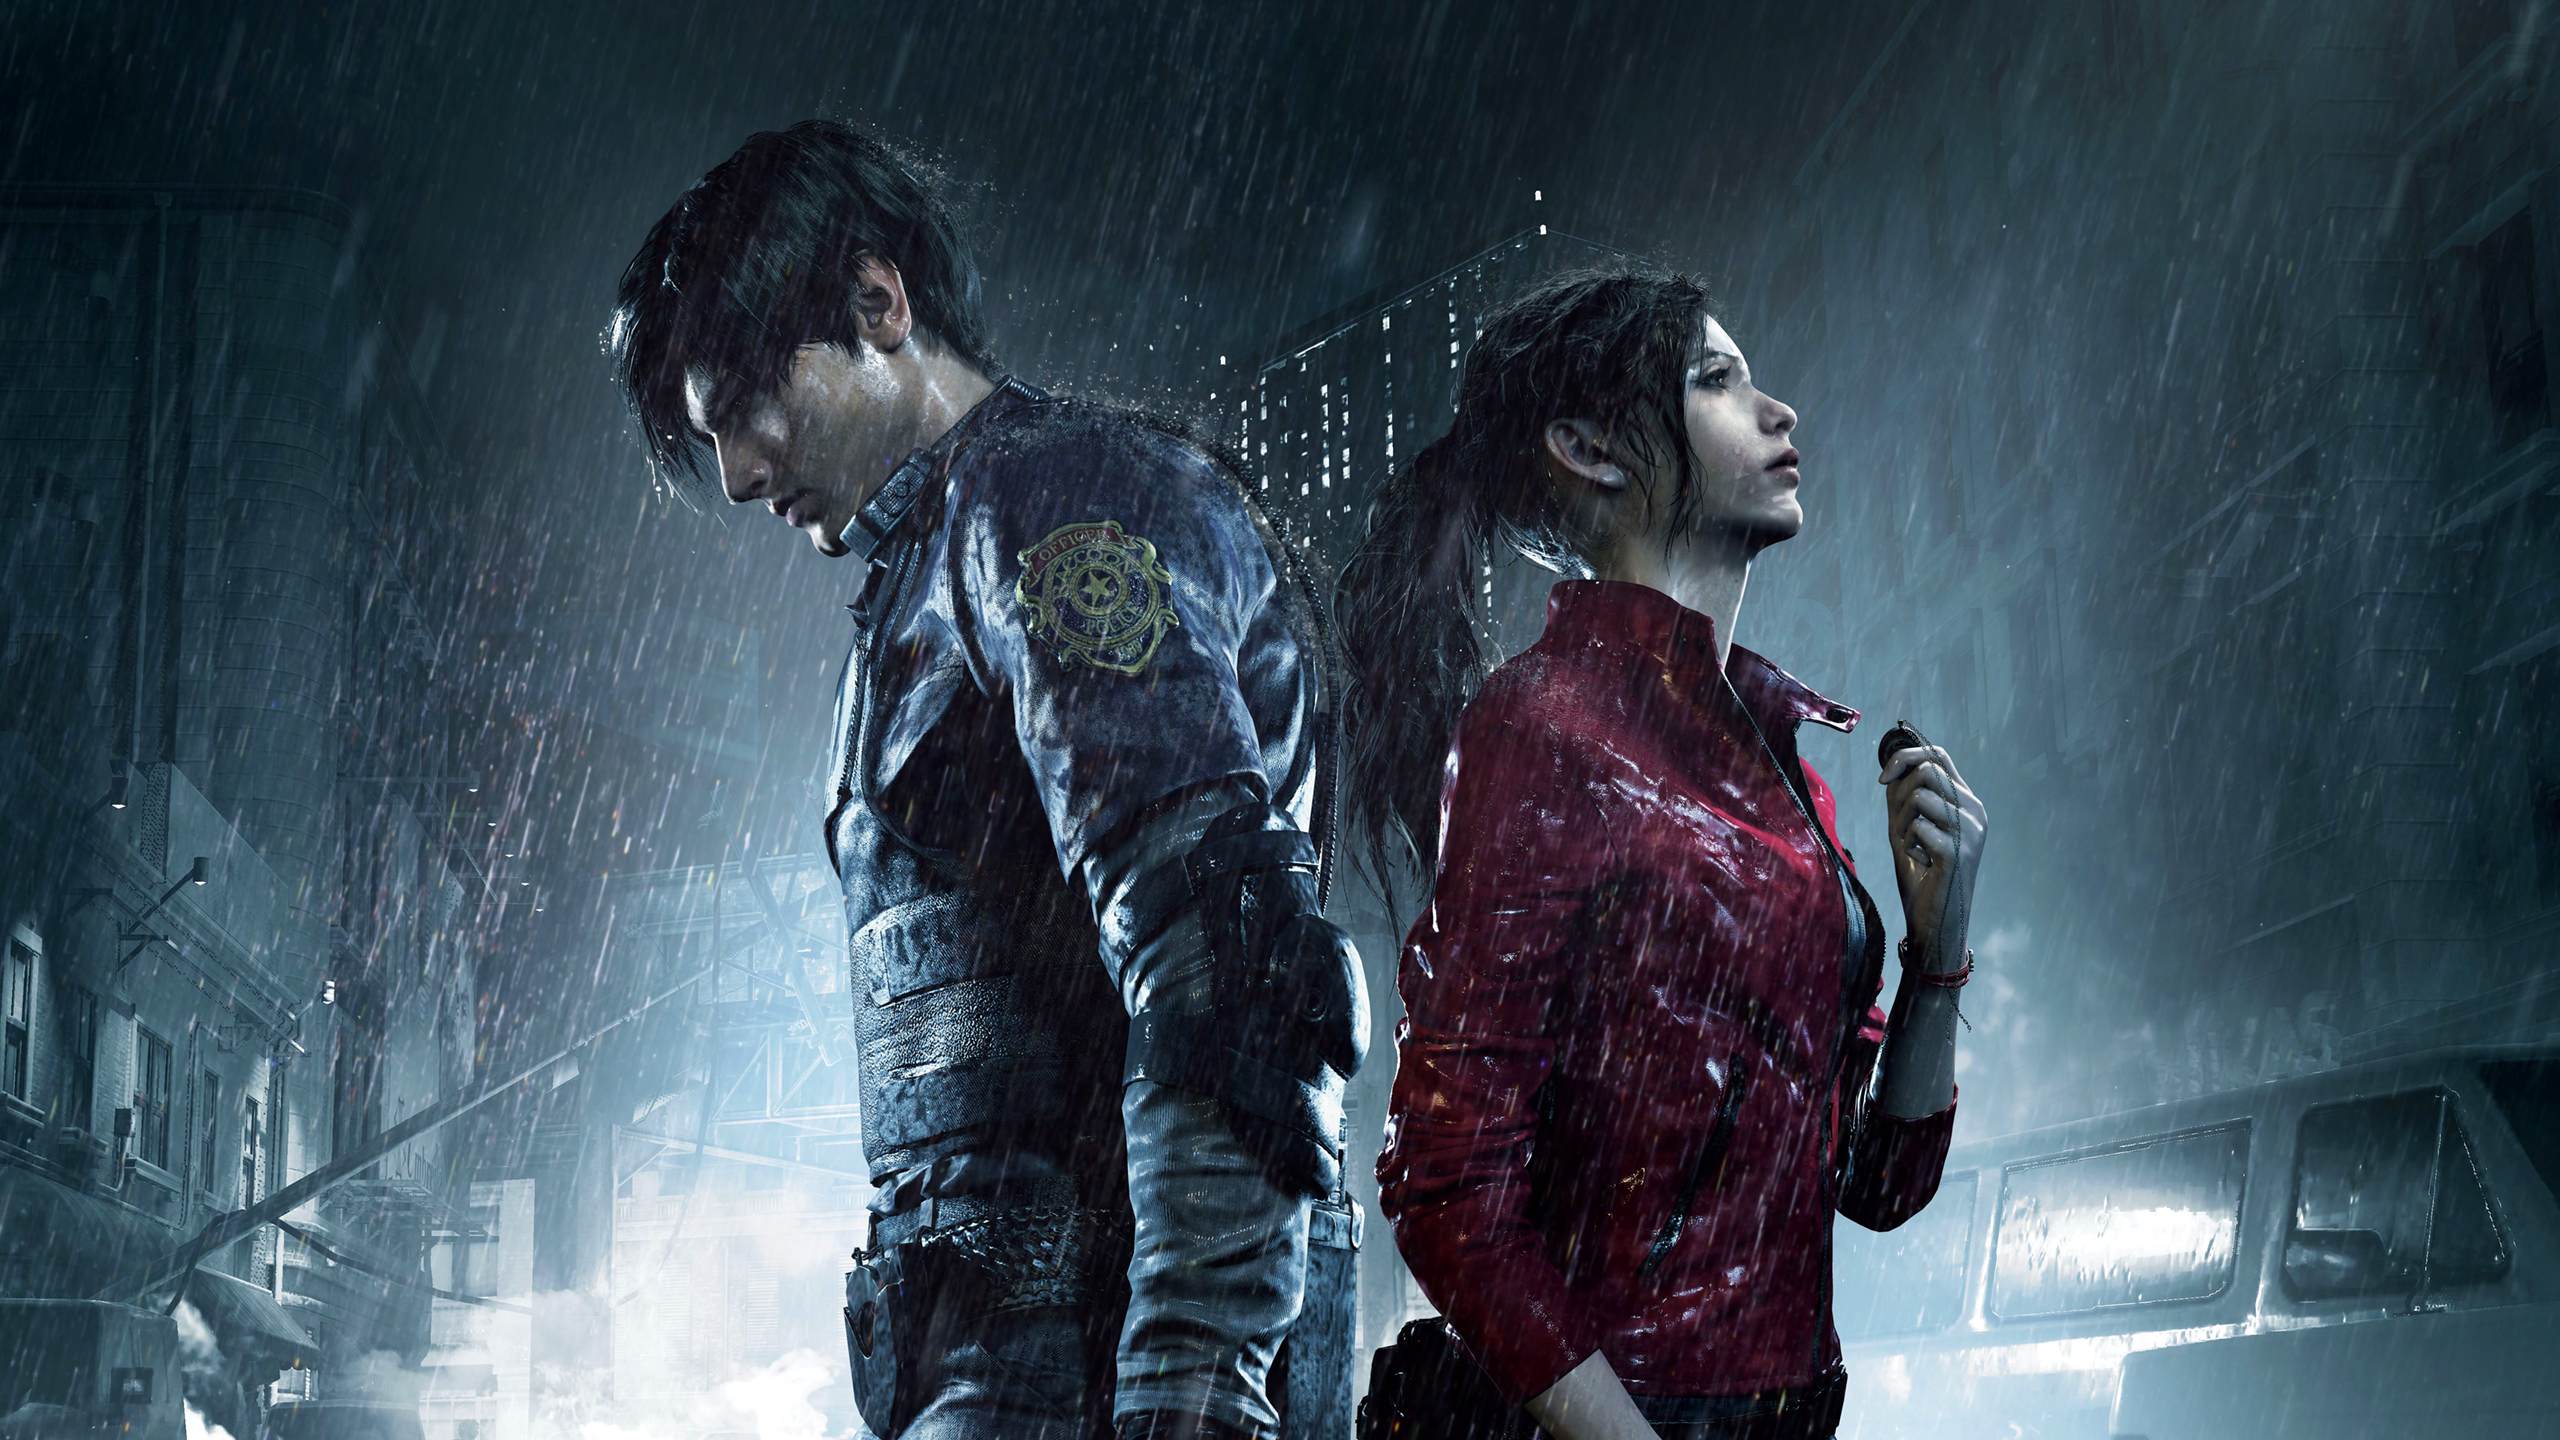 Leon and Claire in Resident Evil 2 Remake